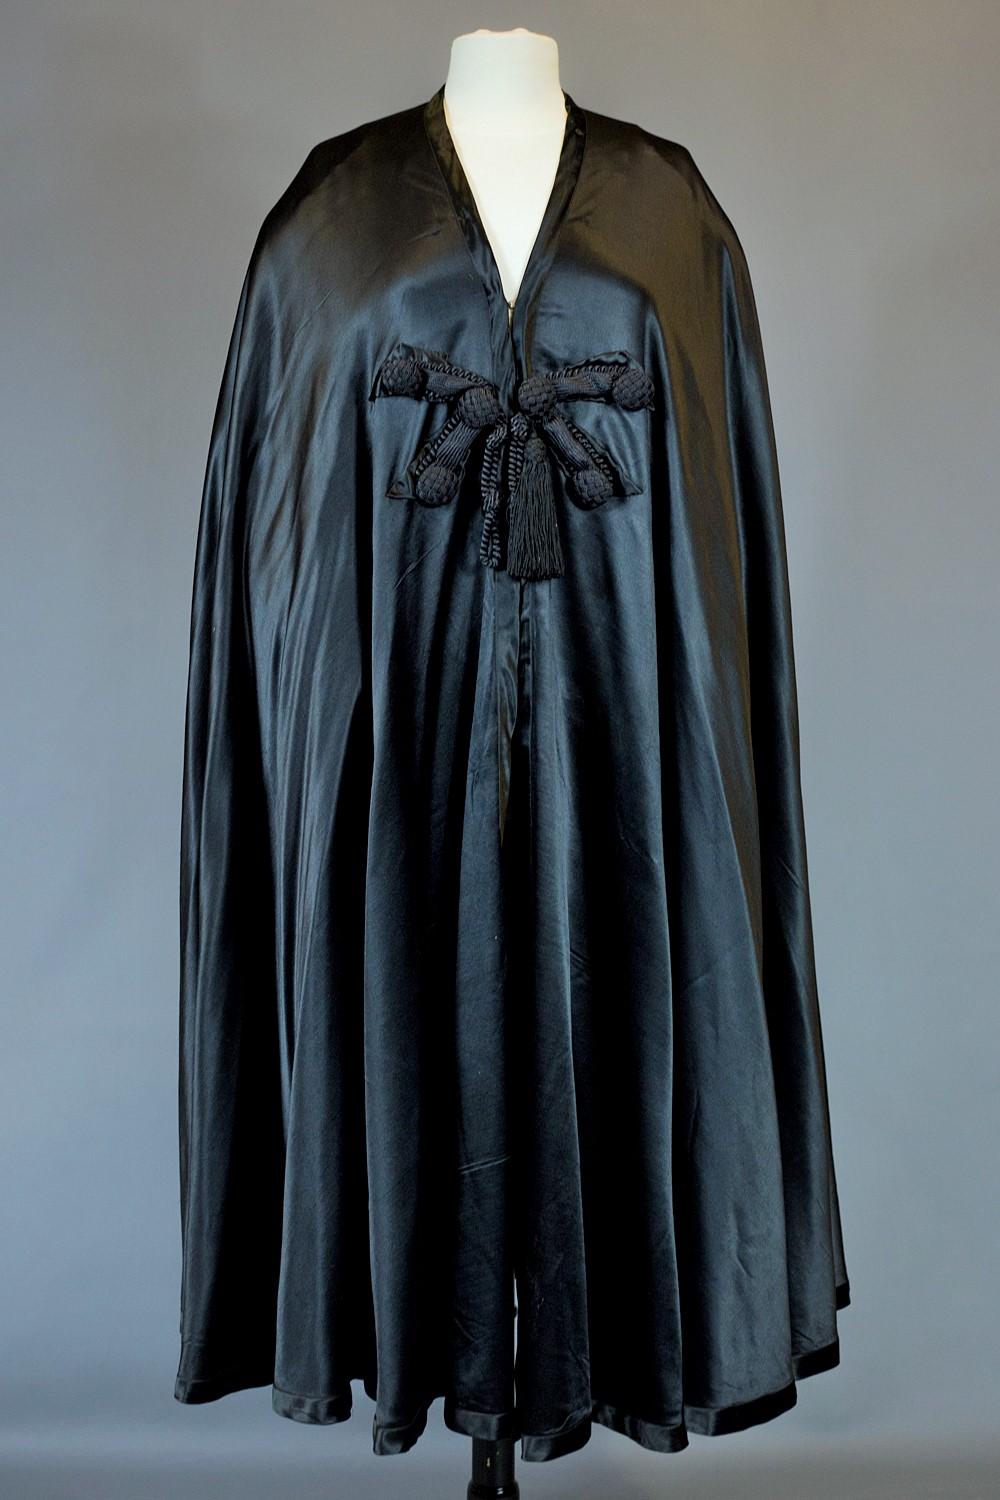 Circa 1920/1940

England

Beautiful evening cape or oriental Burnous in Duchesse silk satin black labelled Bradley 1870, Court Dressmaker, Chepstow Place, Bayswater, London W. Large cape and false hood adorned with a black silk trimmings pompom with